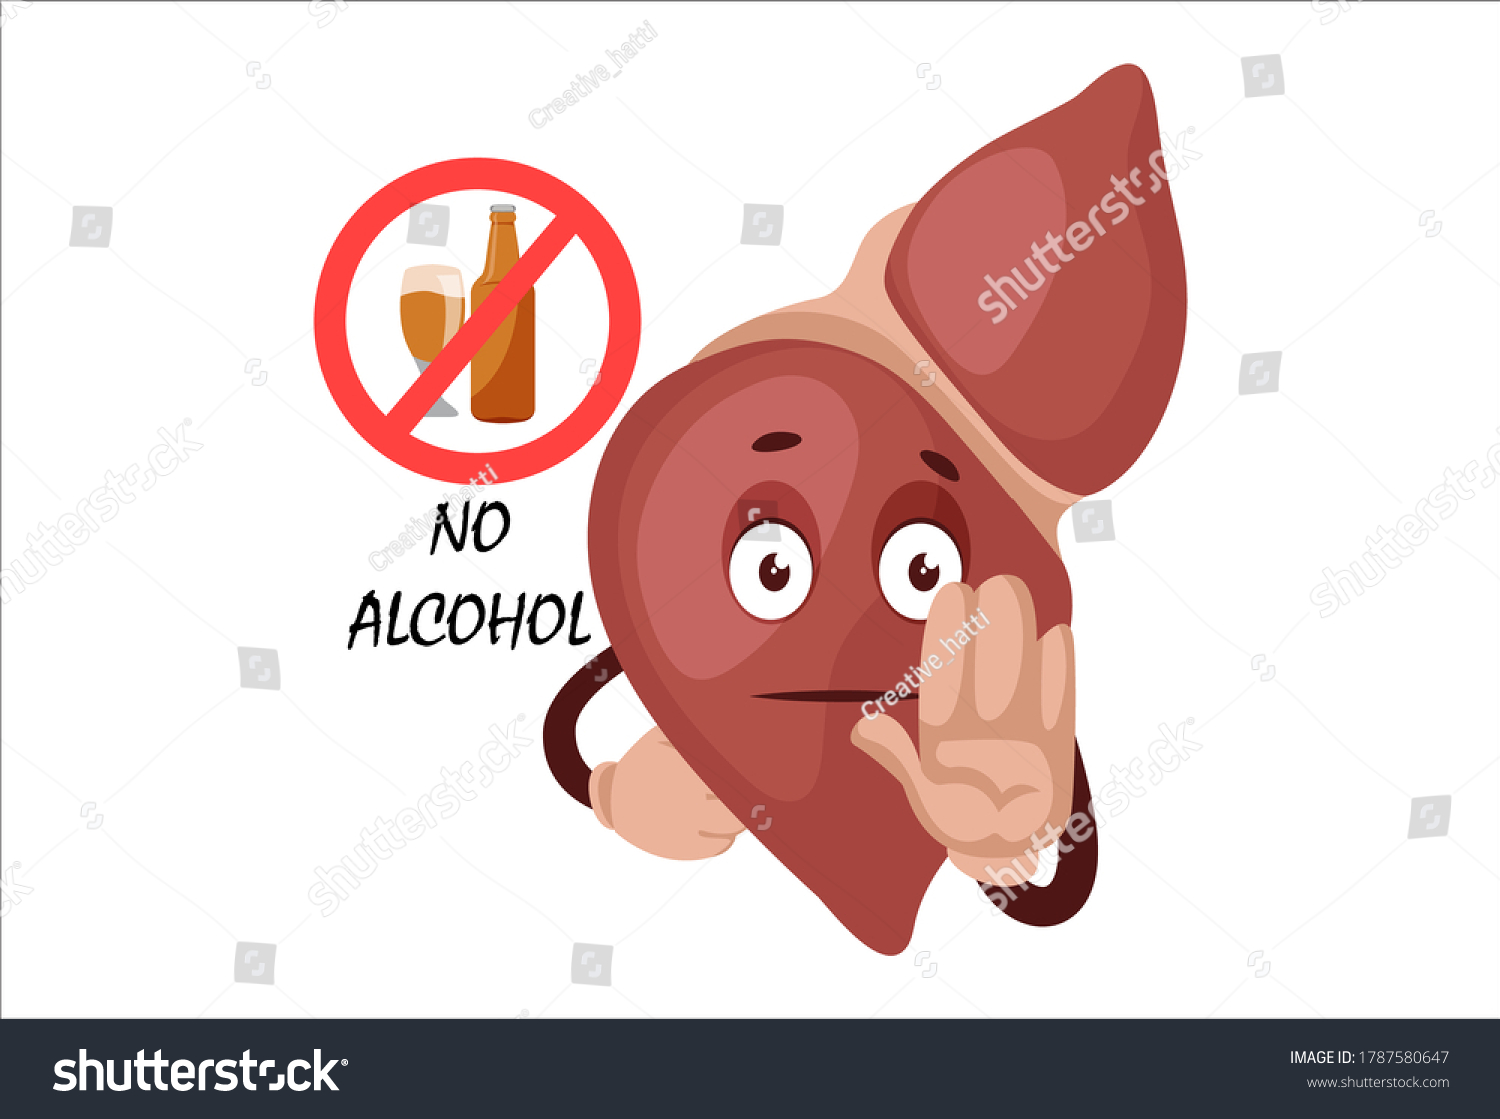 SVG of Vector graphic illustration. Liver is saying no alcohol. Individually on white background.	
 svg